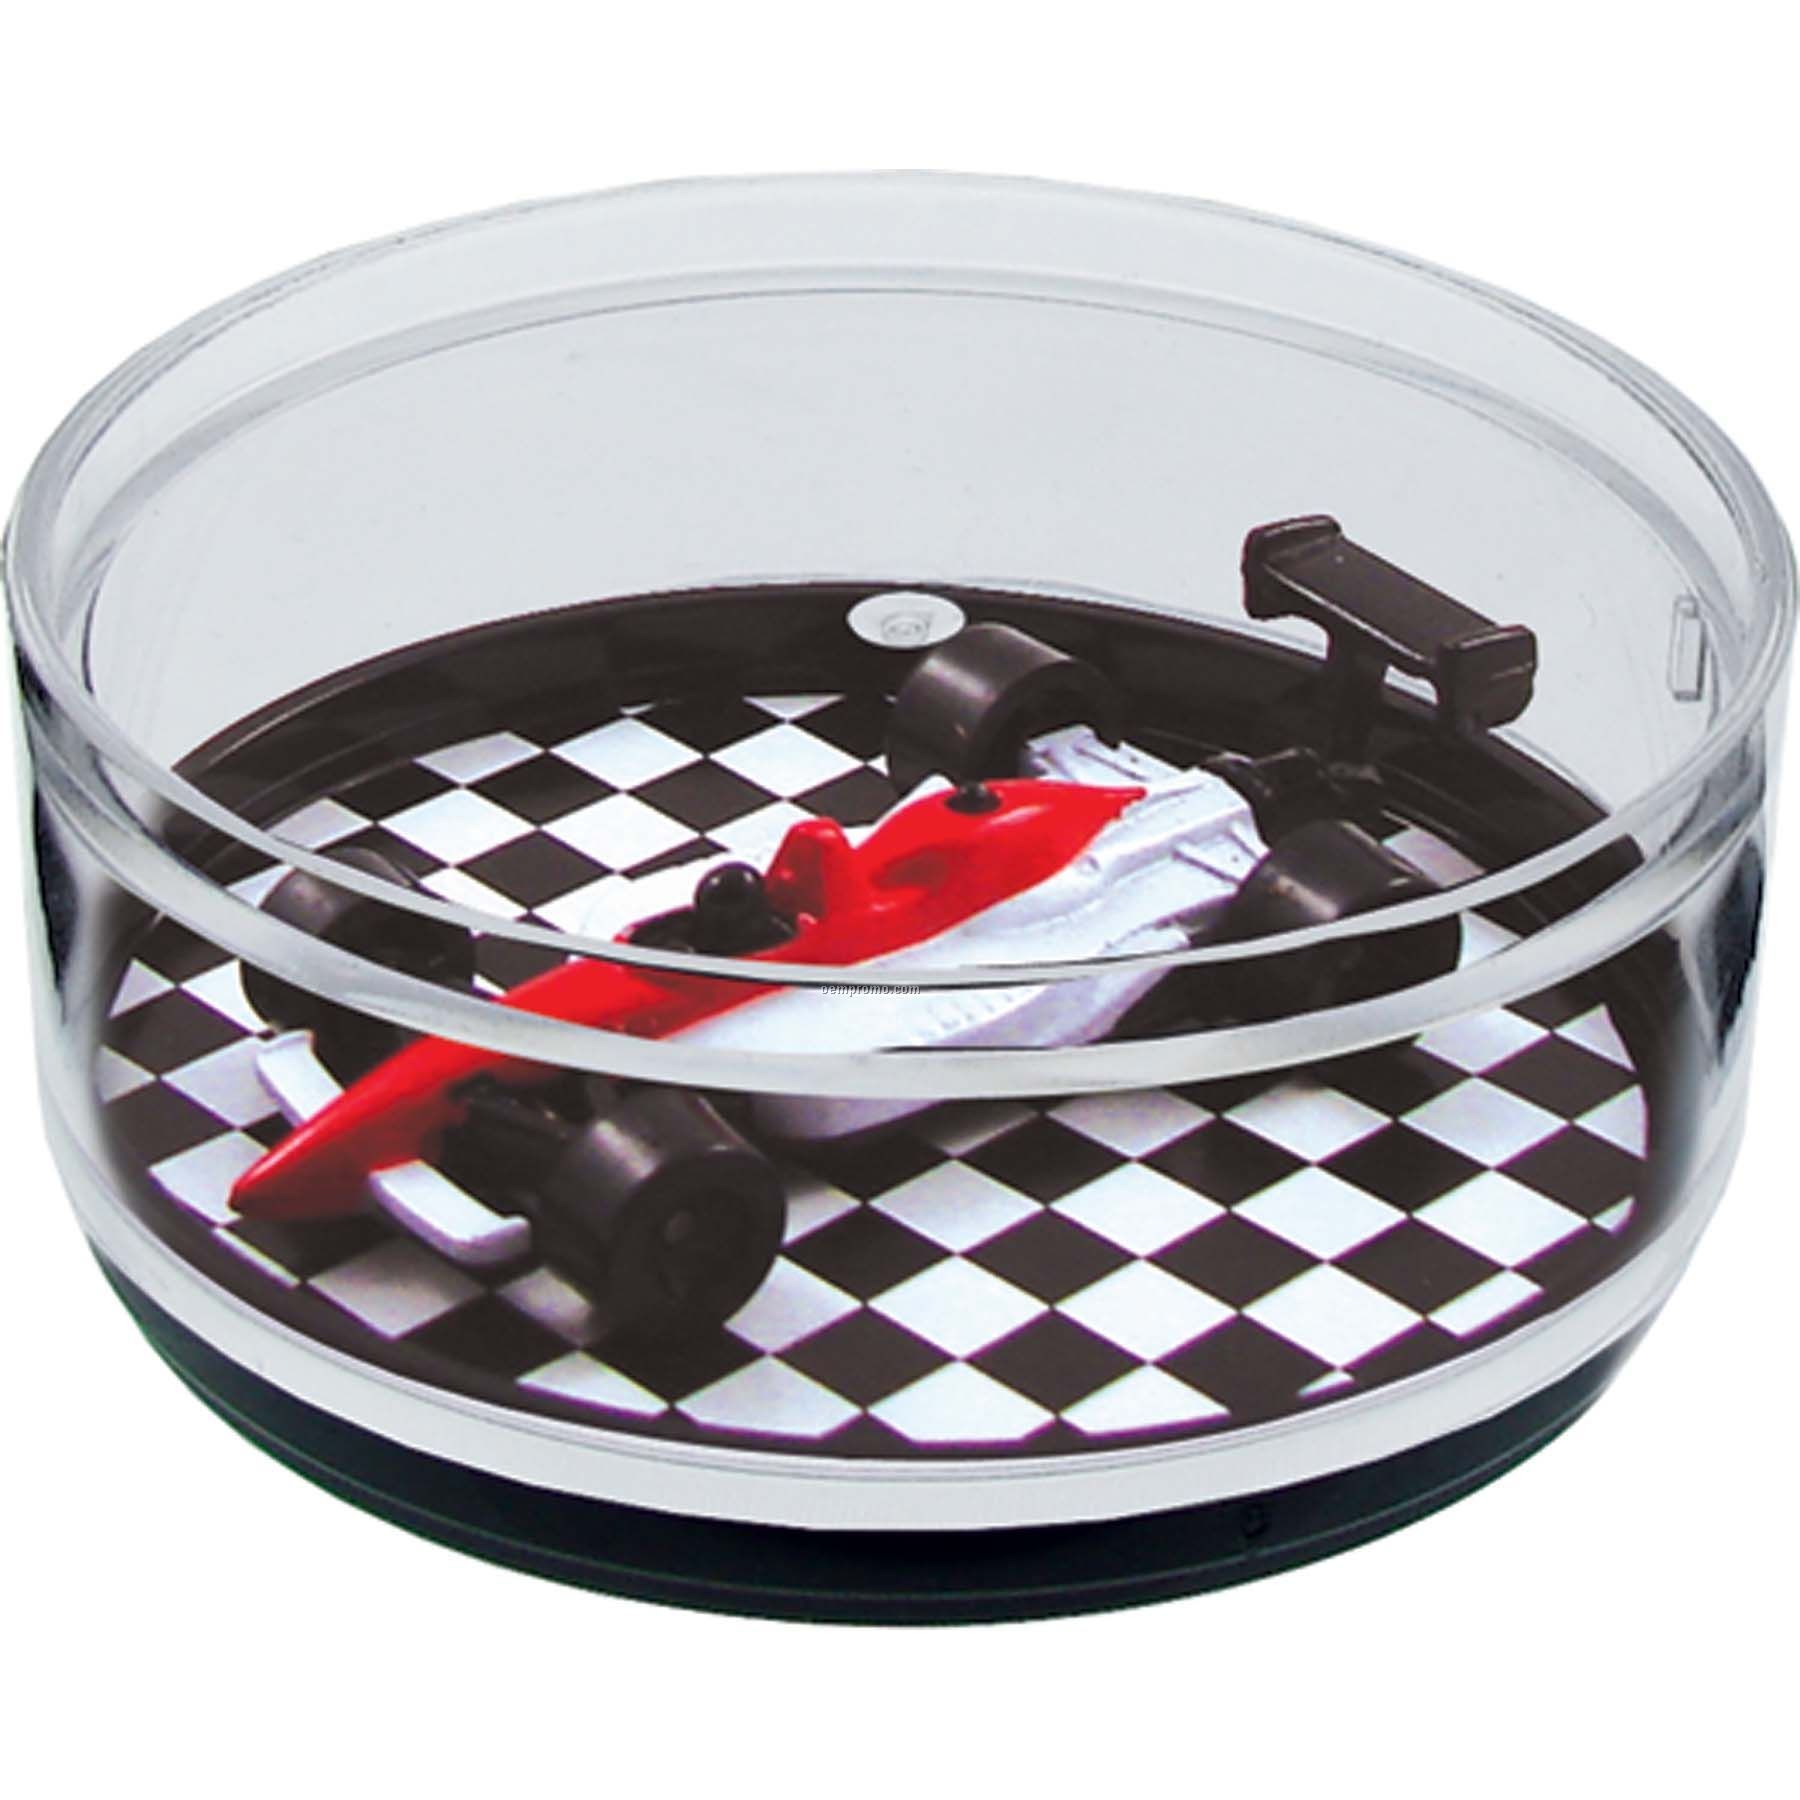 Victory Lane Compartment Coaster Caddy